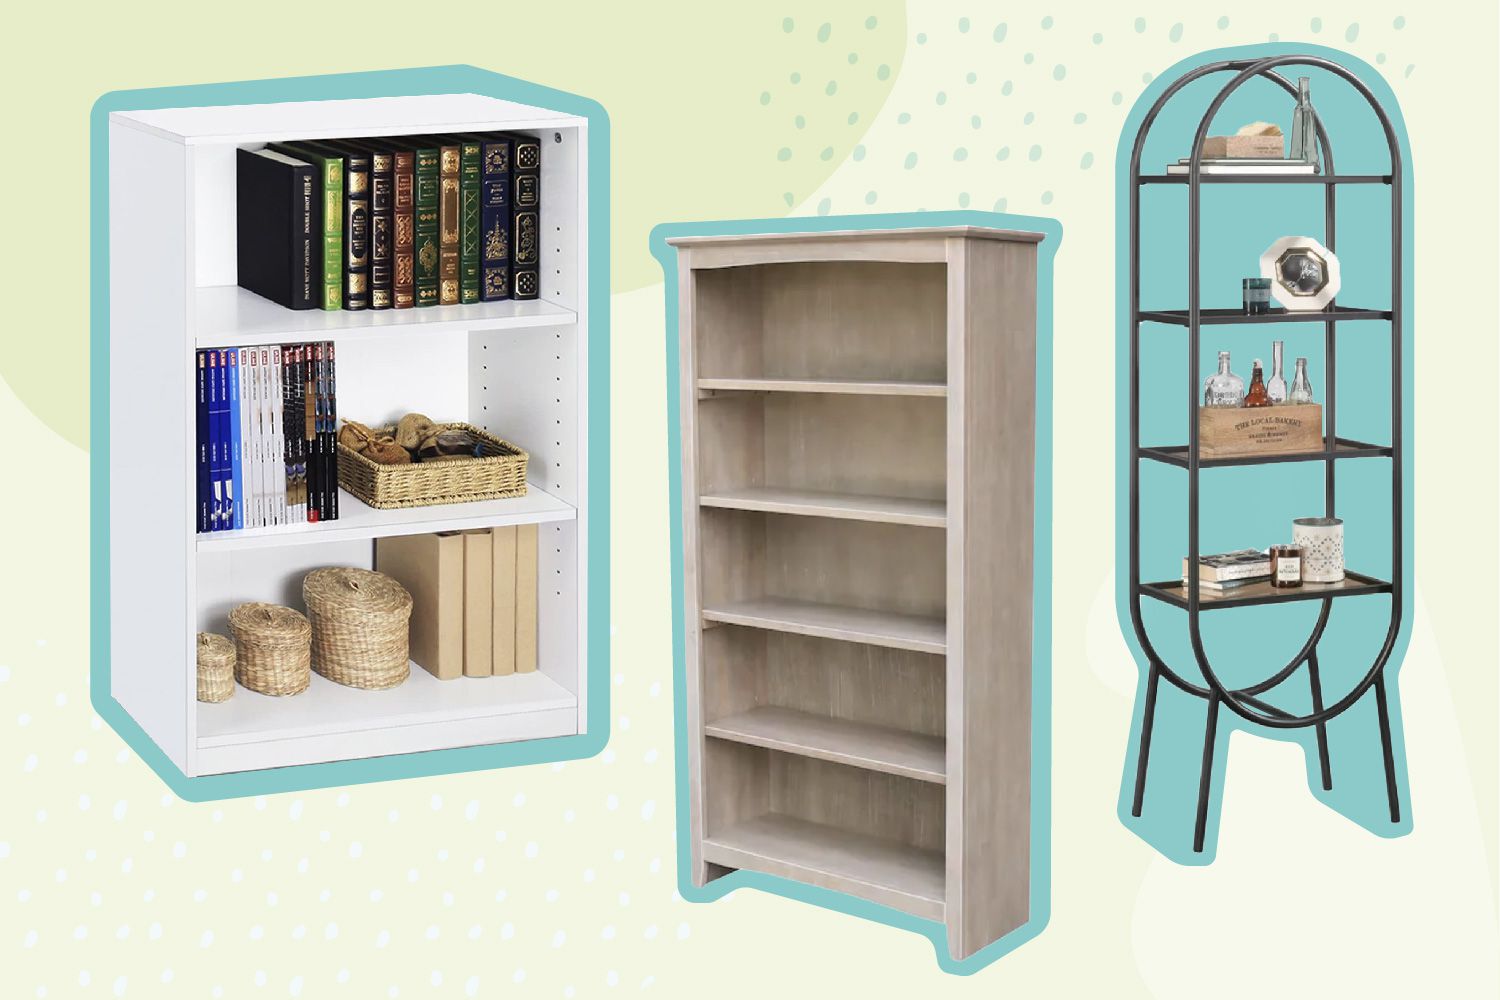 Showcase More Than Just Books With Our Favorite Bookcases